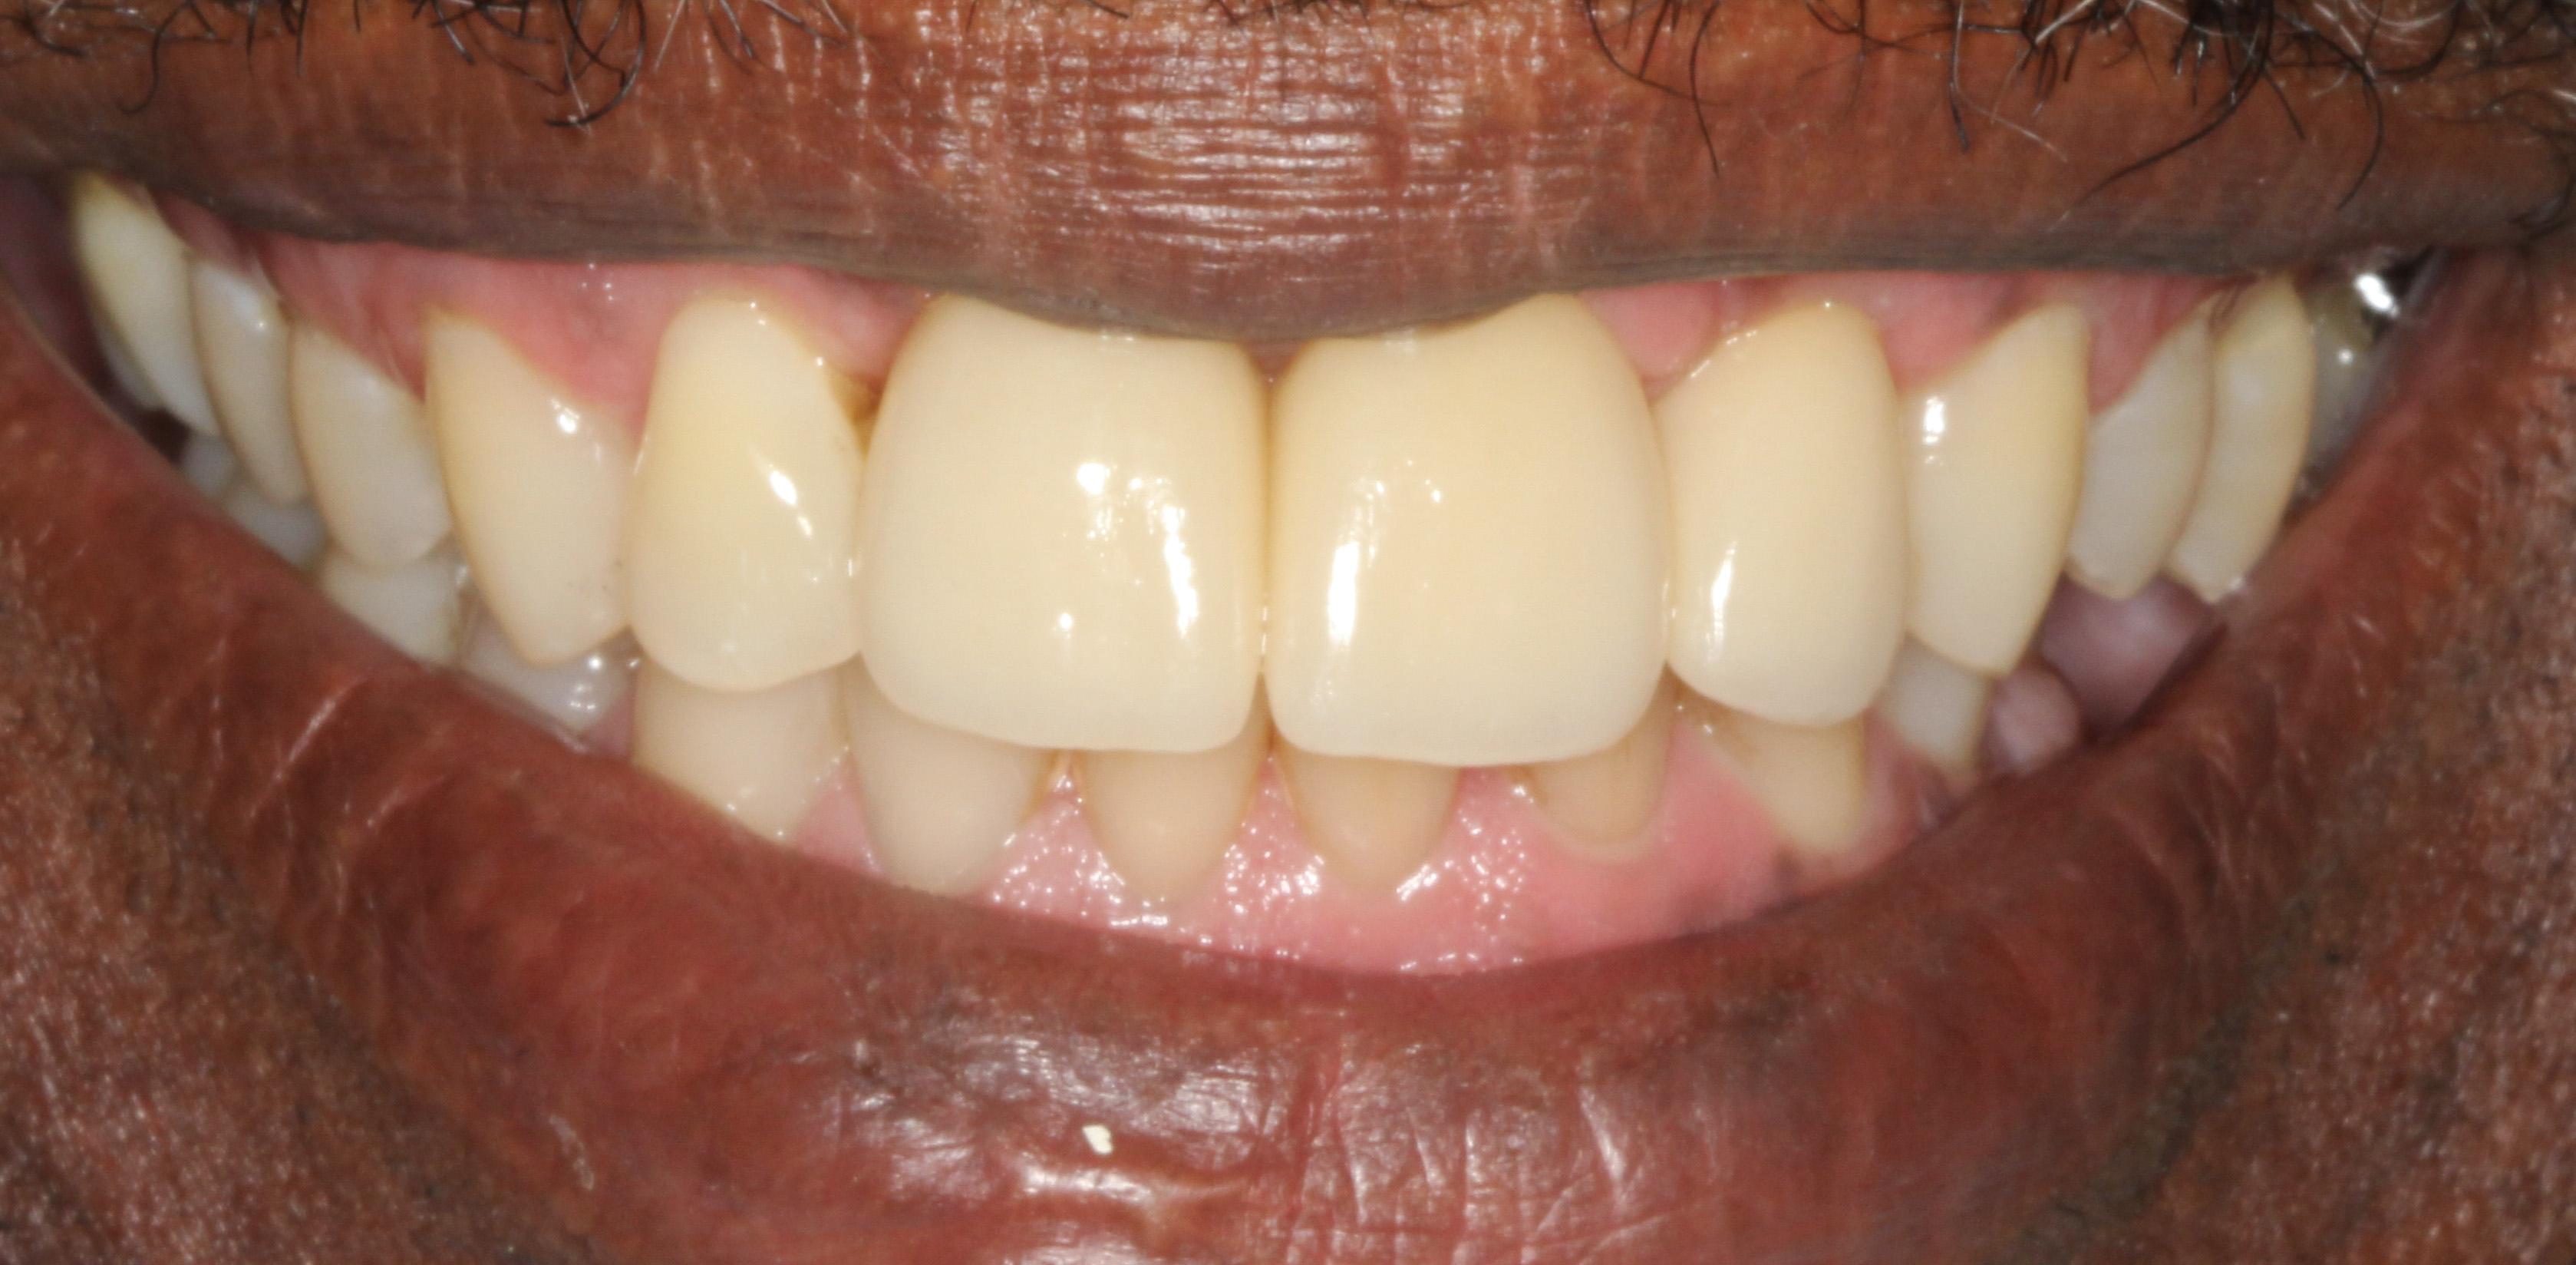 Implant crowns